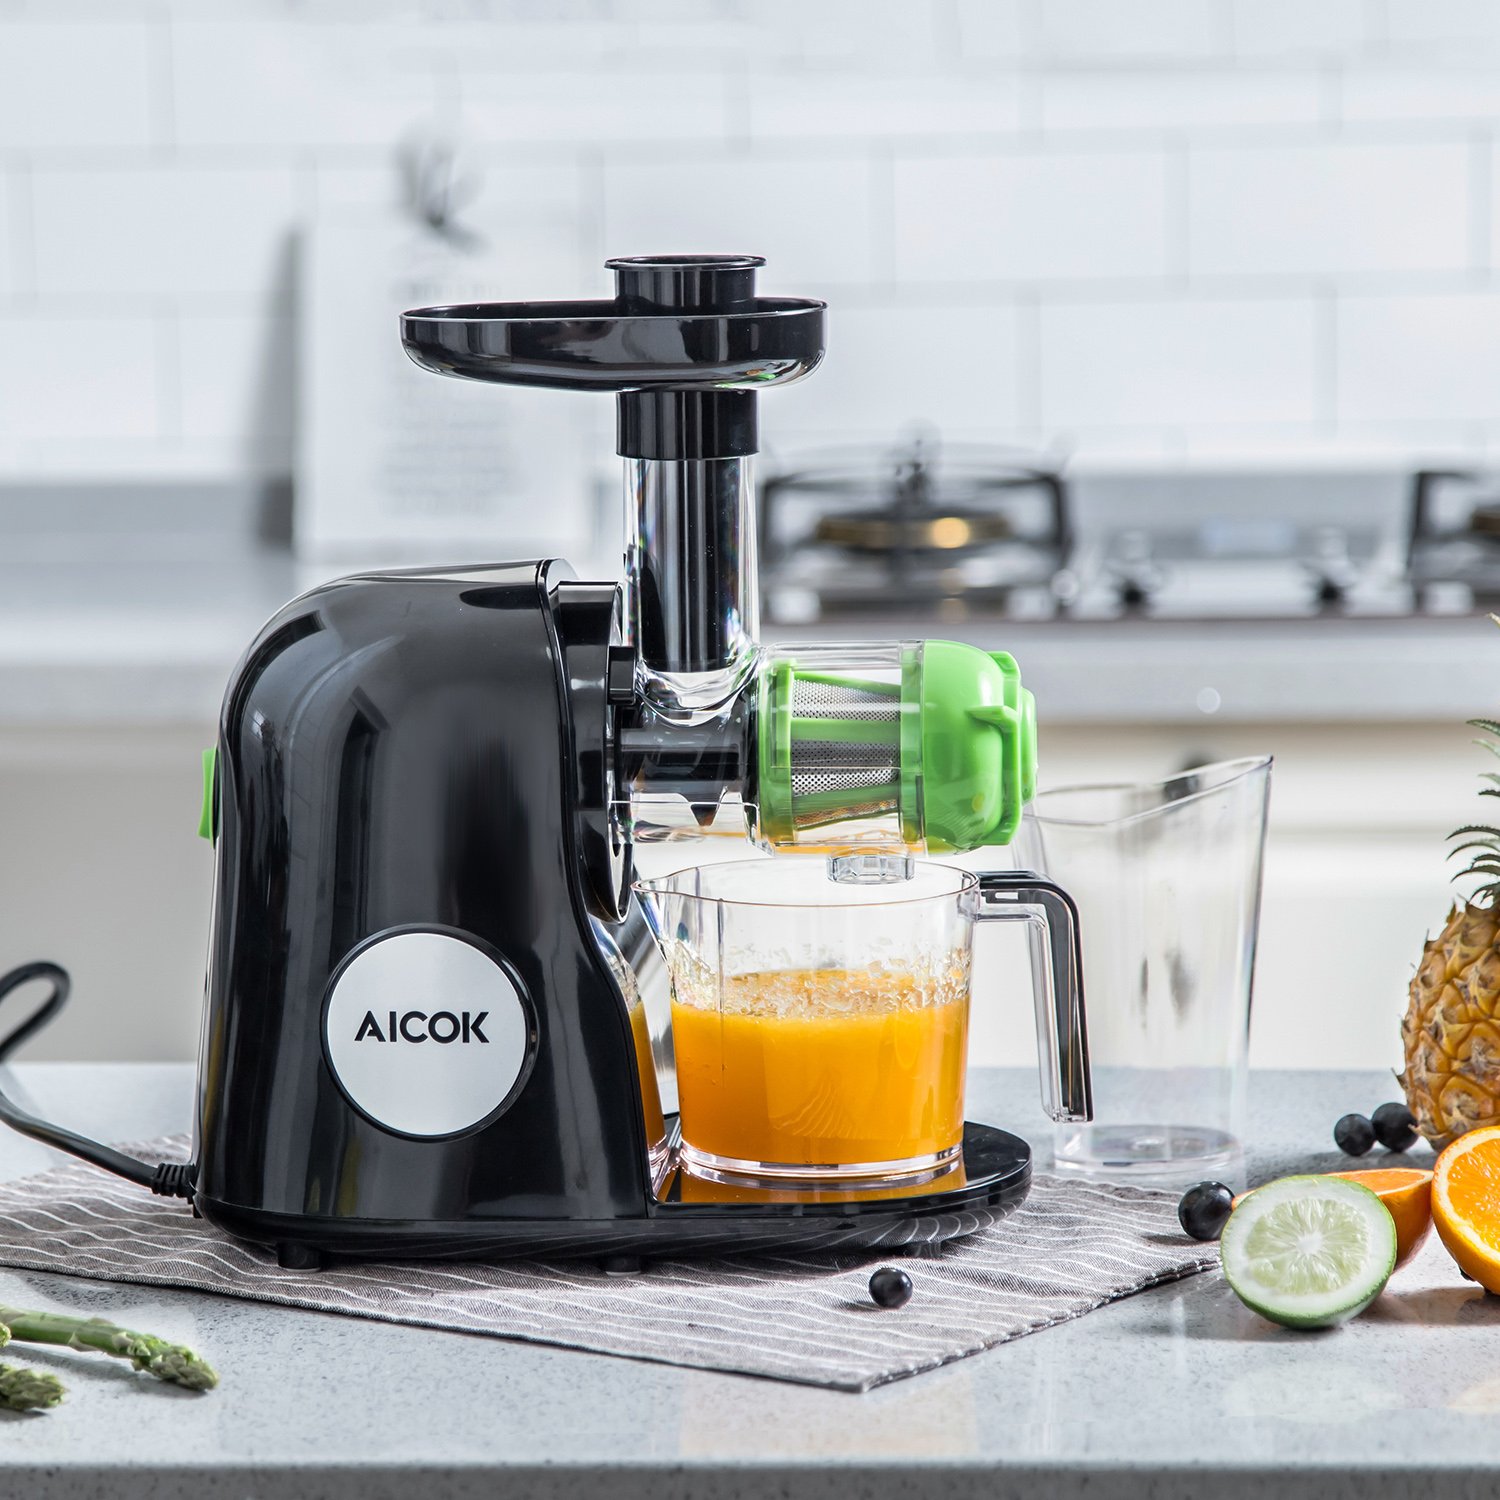 How To Use An Aicok Juicer